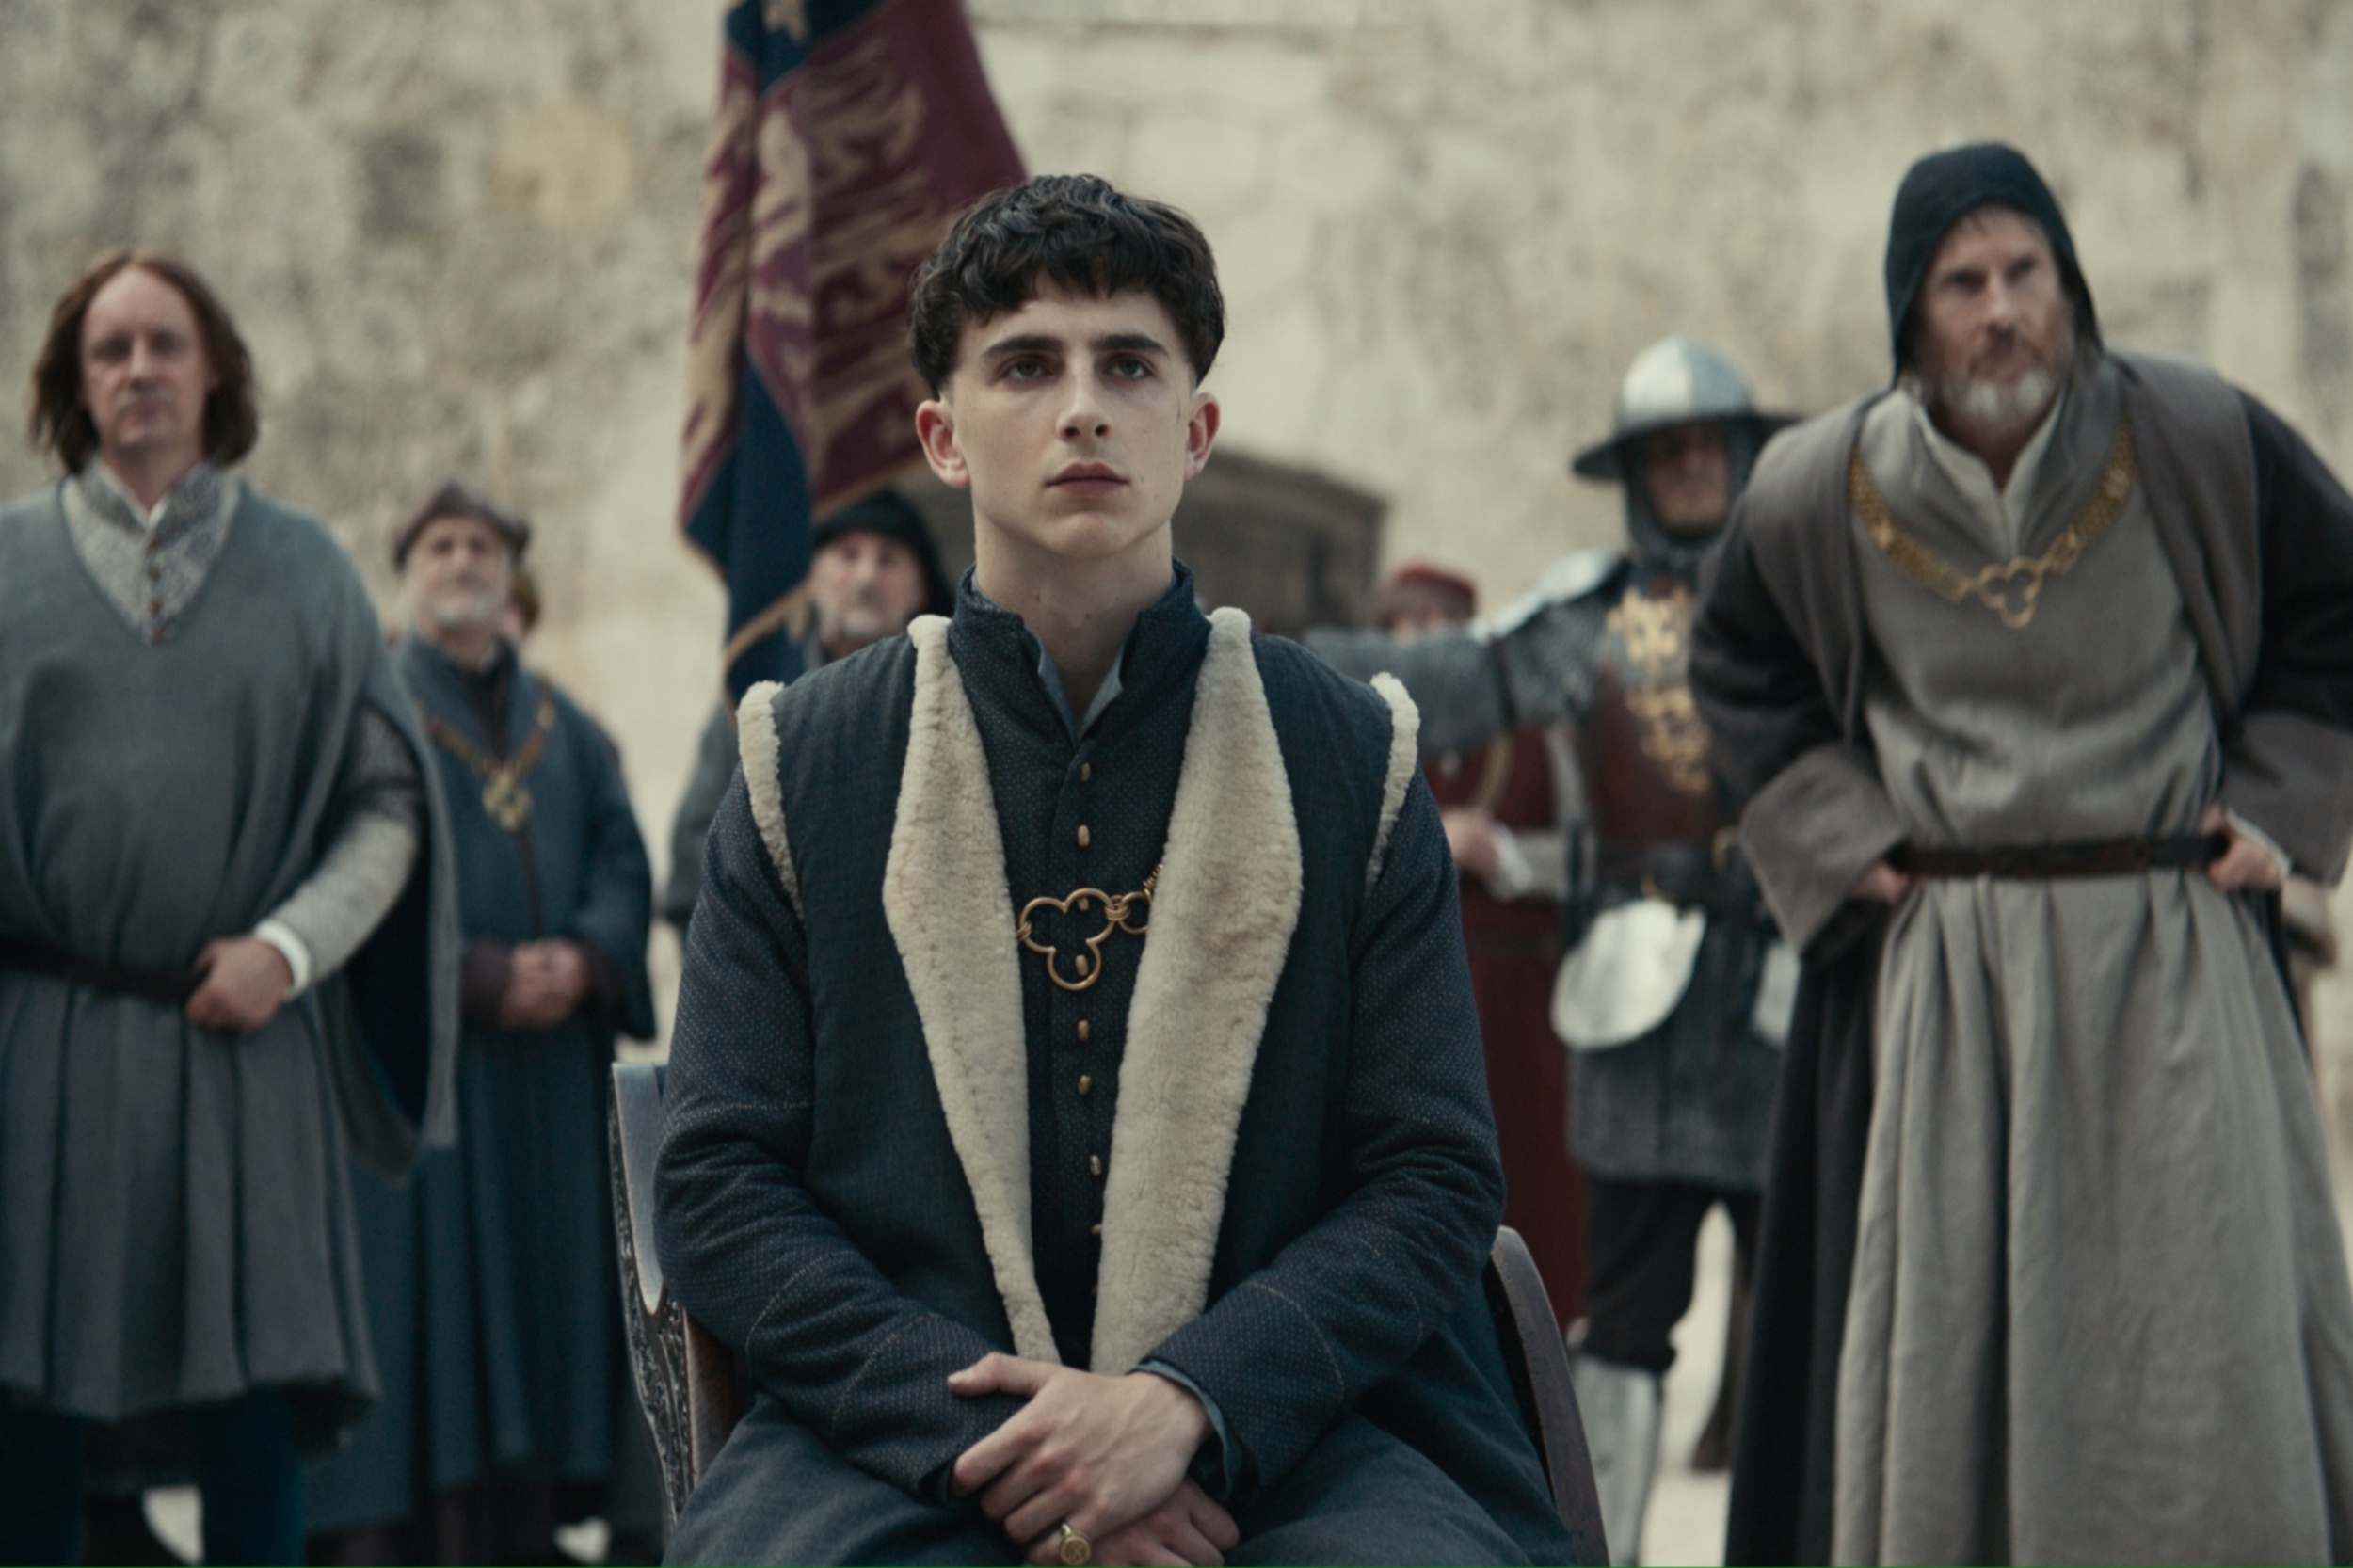 <p><em>The King</em> is a historical epic that tells the story of young Henry V as he begins his reign as King of England in the fifteenth century after the death of his tyrannical father. Timothée Chalamet sports a memorable bowl cut in the lead role but once again proves himself as one of the best young actors of this generation. The on-screen world is brought to life with gritty cinematography and direction, featuring an array of battle scenes that are shot with brutality and intensity. </p><p>You may also like: <a href='https://www.yardbarker.com/entertainment/articles/20_of_the_best_teen_revenge_movies_022724/s1__40002362'>20 of the best teen revenge movies</a></p>